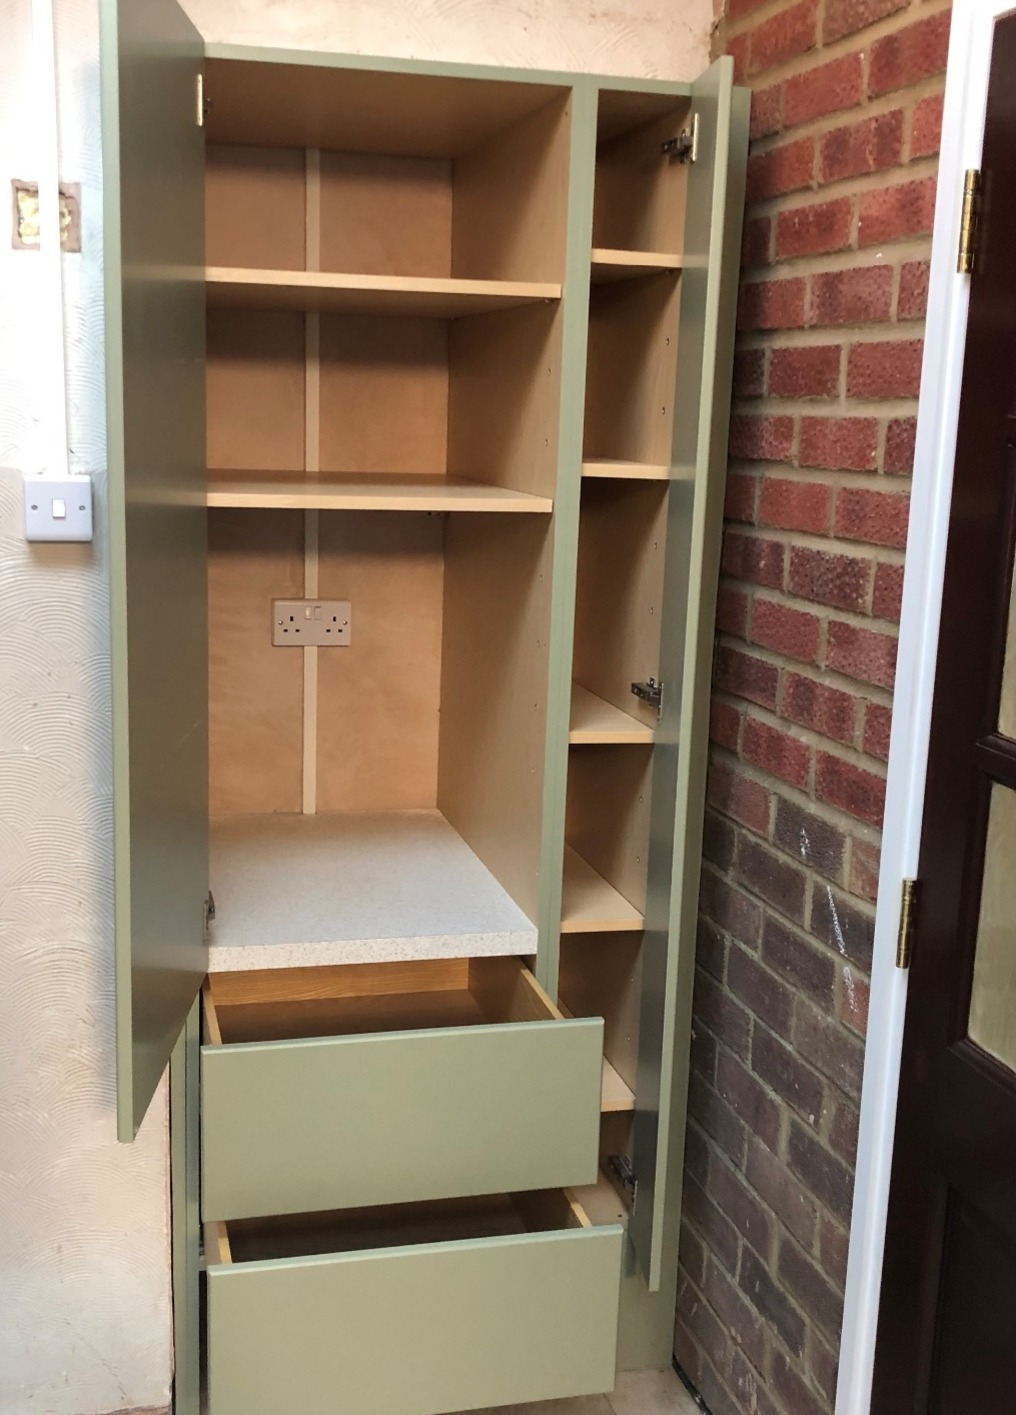 Storage in utility room